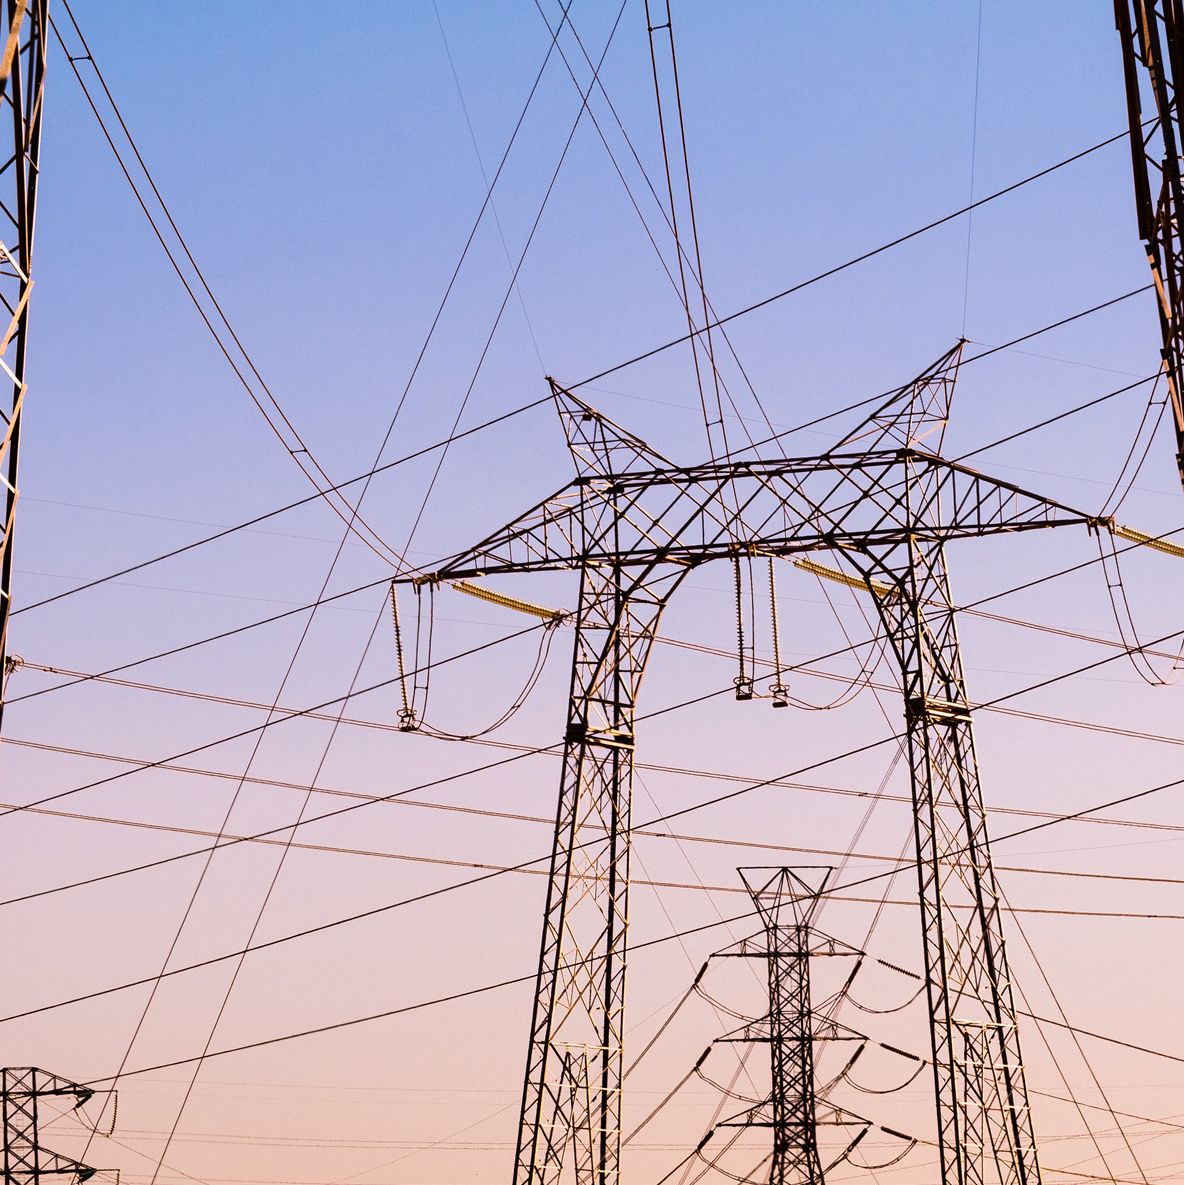 Everything You Need to Know About How the U.S. Power Grid Works